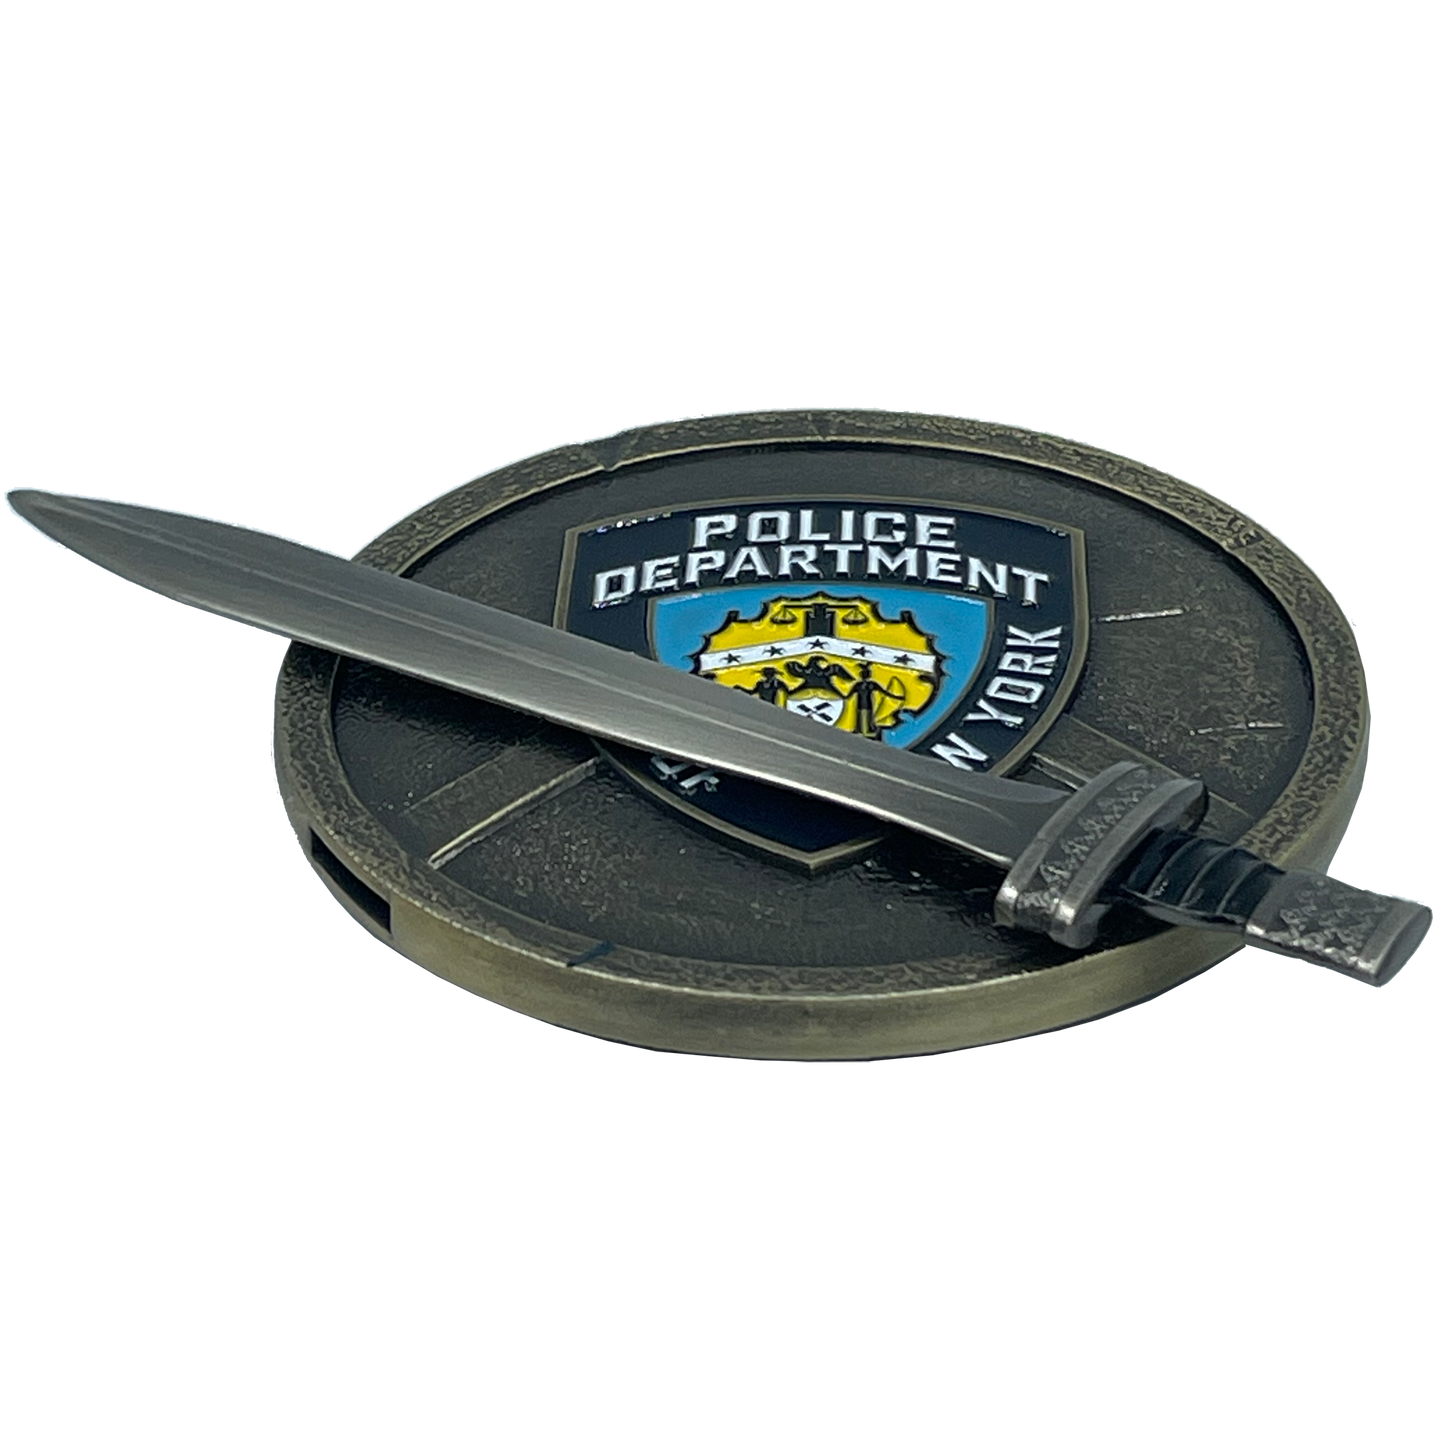 BL4-008 NYPD New York City Police Department Detective Shield with removable Sword Challenge Coin Set